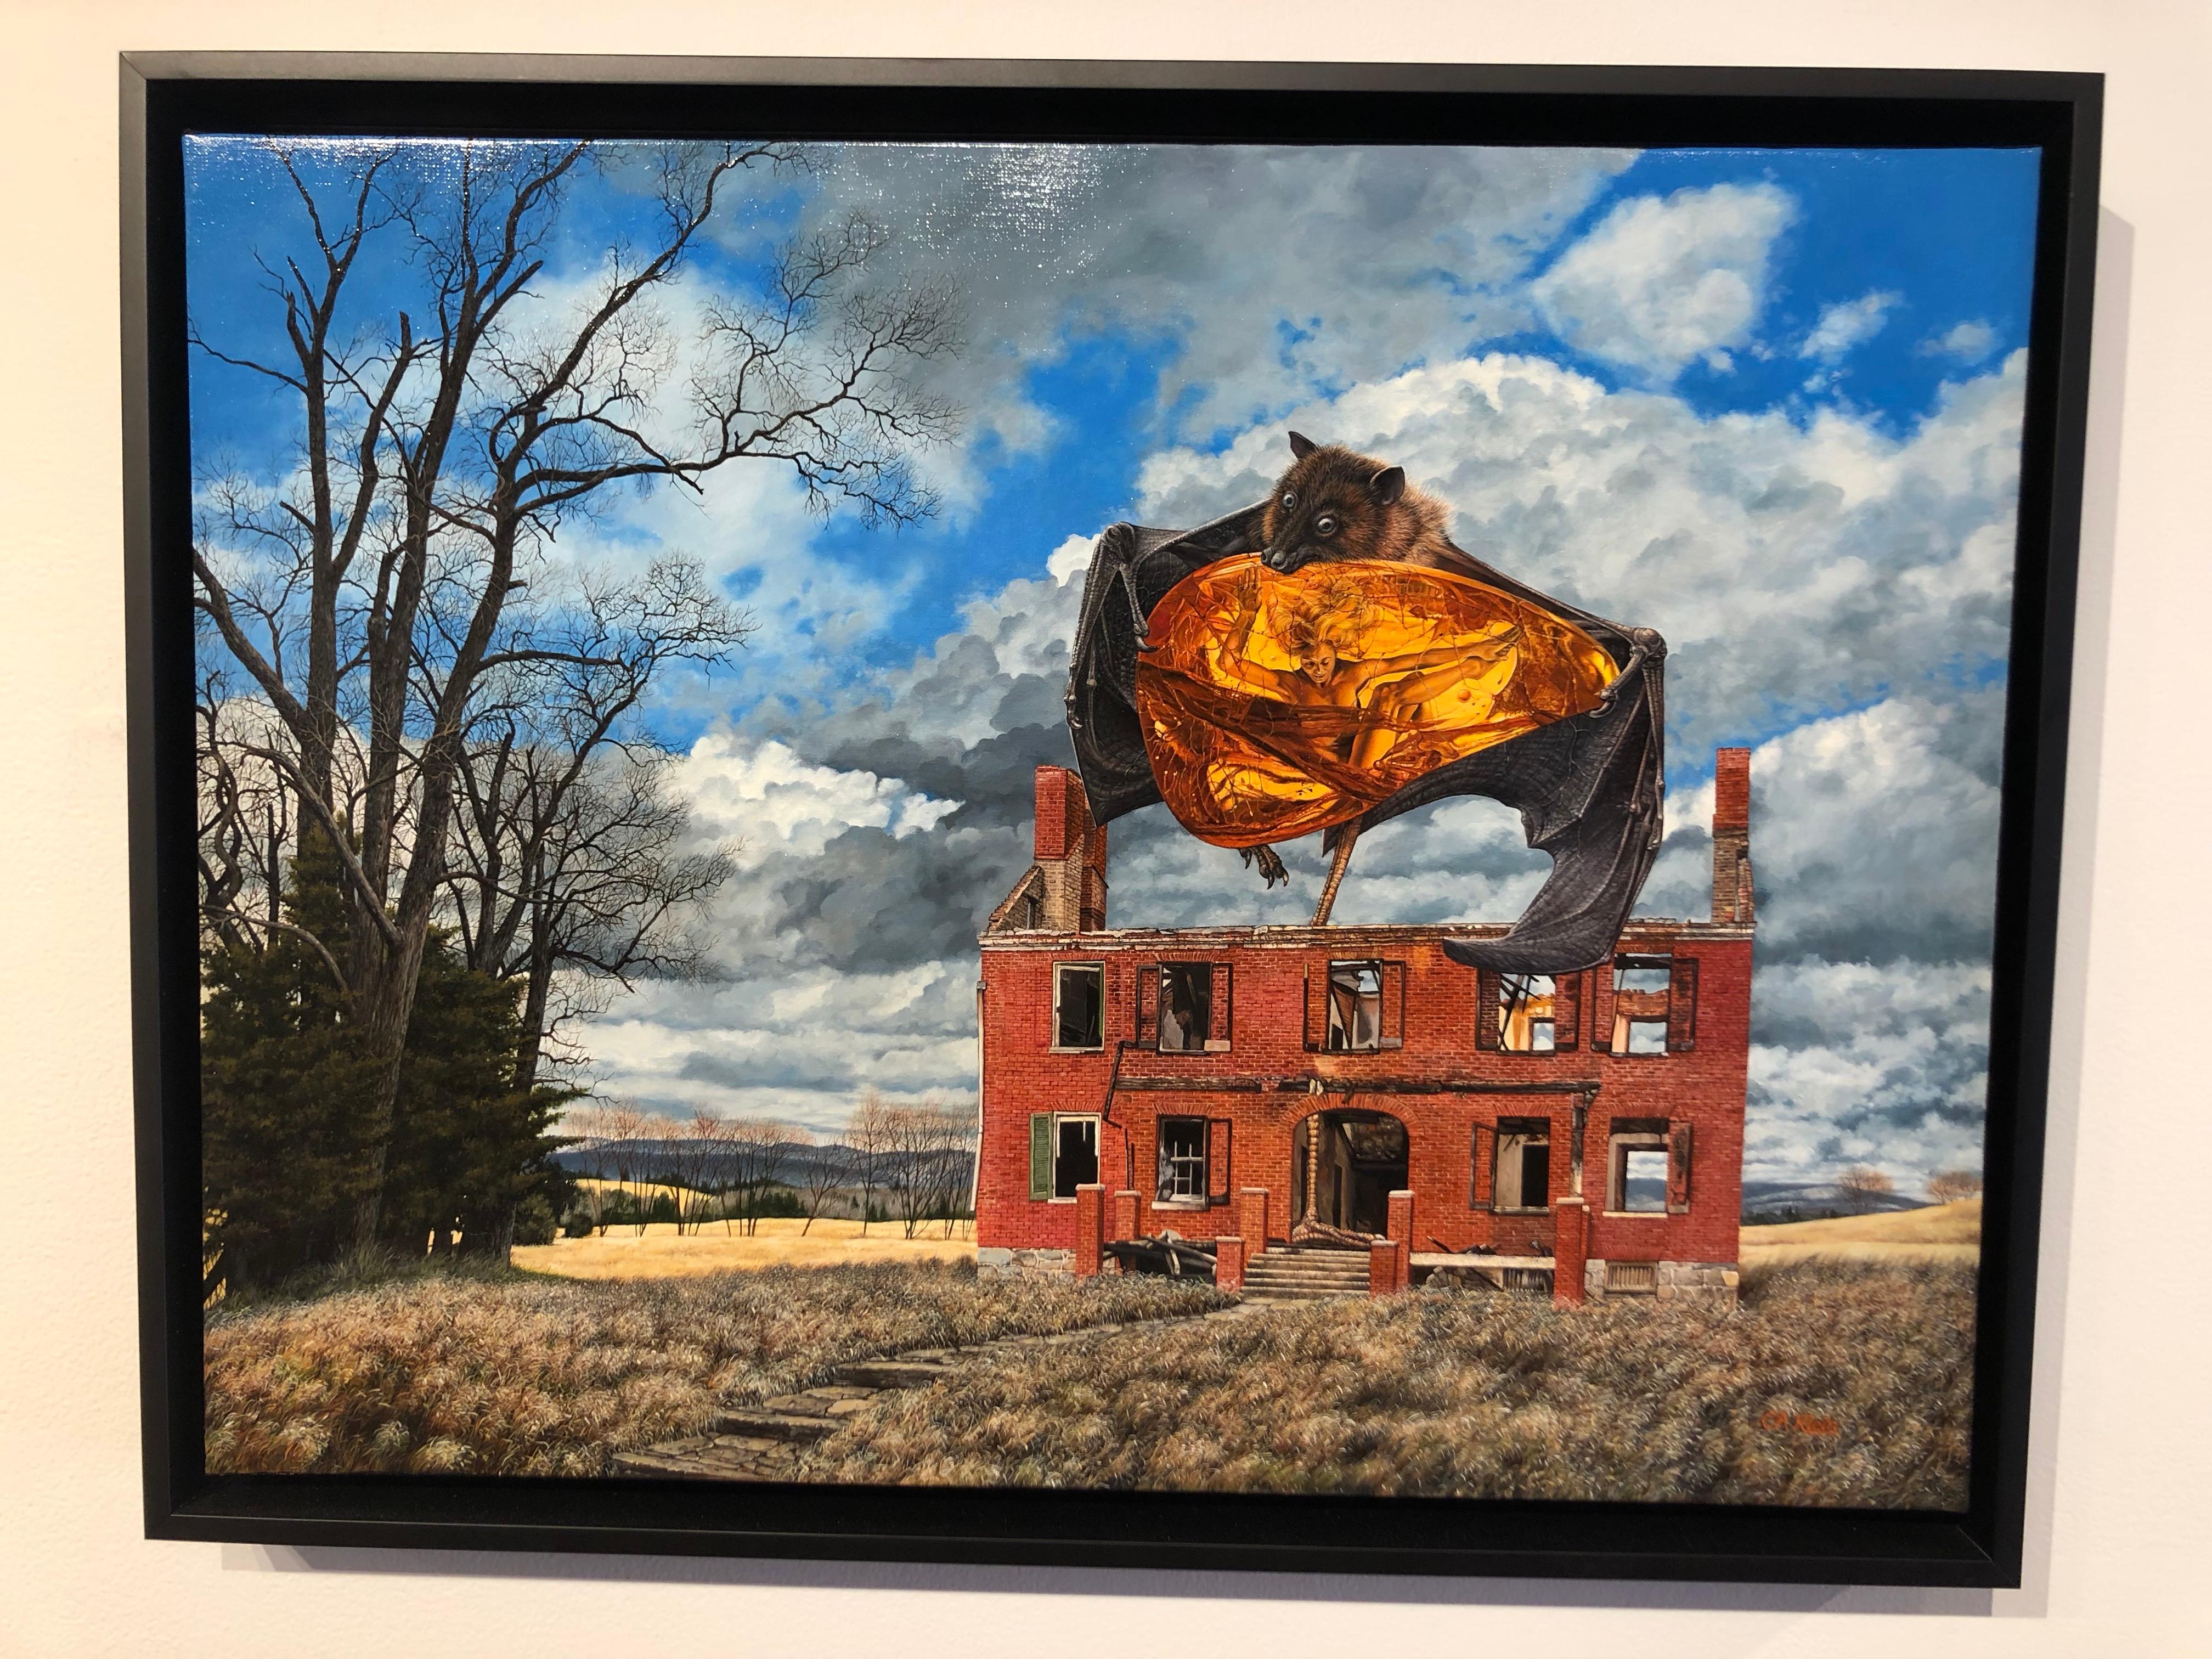 Amber Waves - Bat Holding Amber Encased Human Floats Above Dystopian Farmland - Painting by Christopher Klein